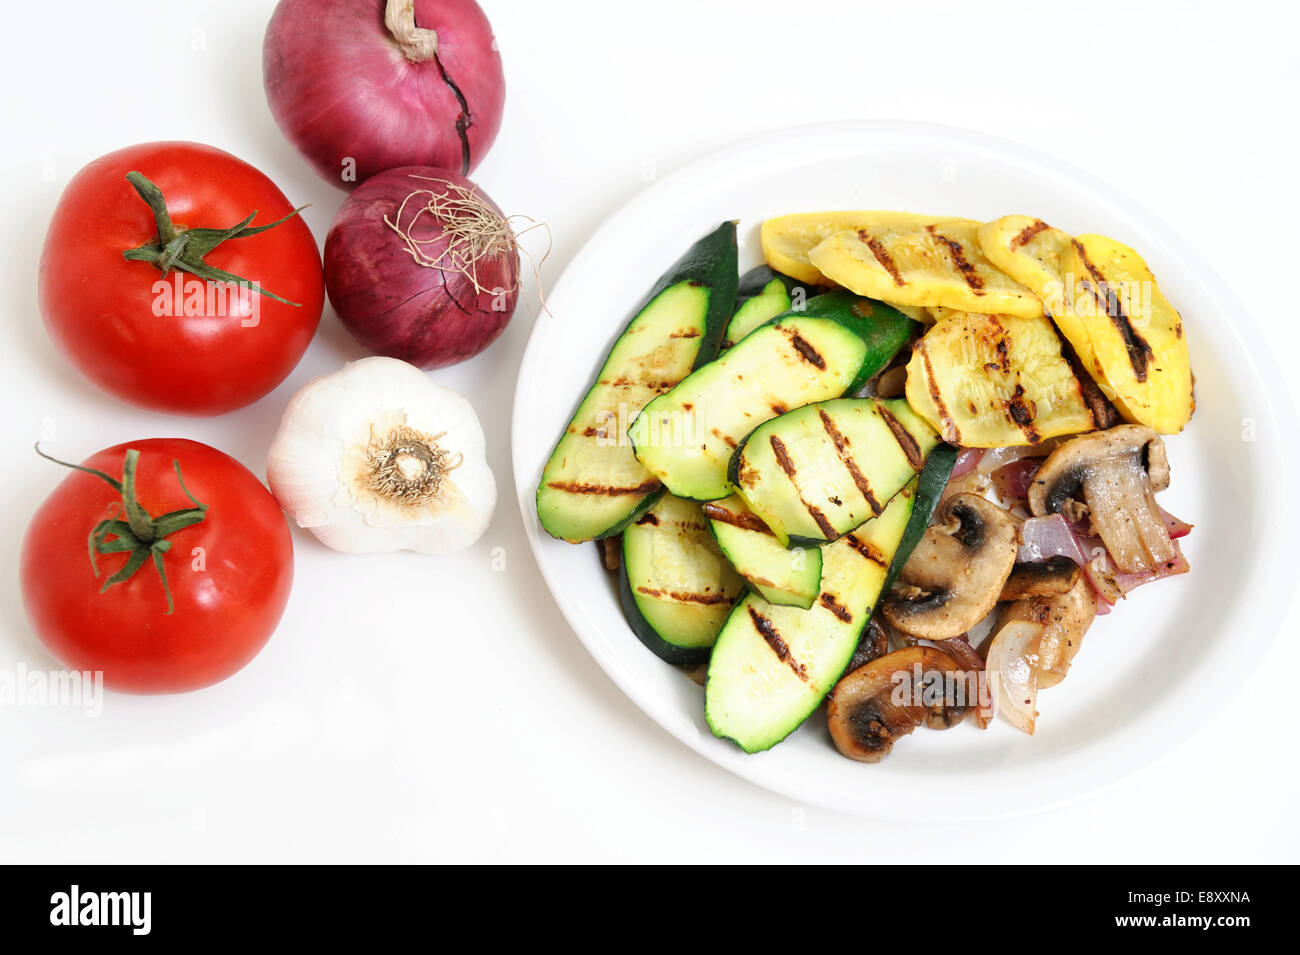 Mushrooms And Grilled Squash Stock Photo